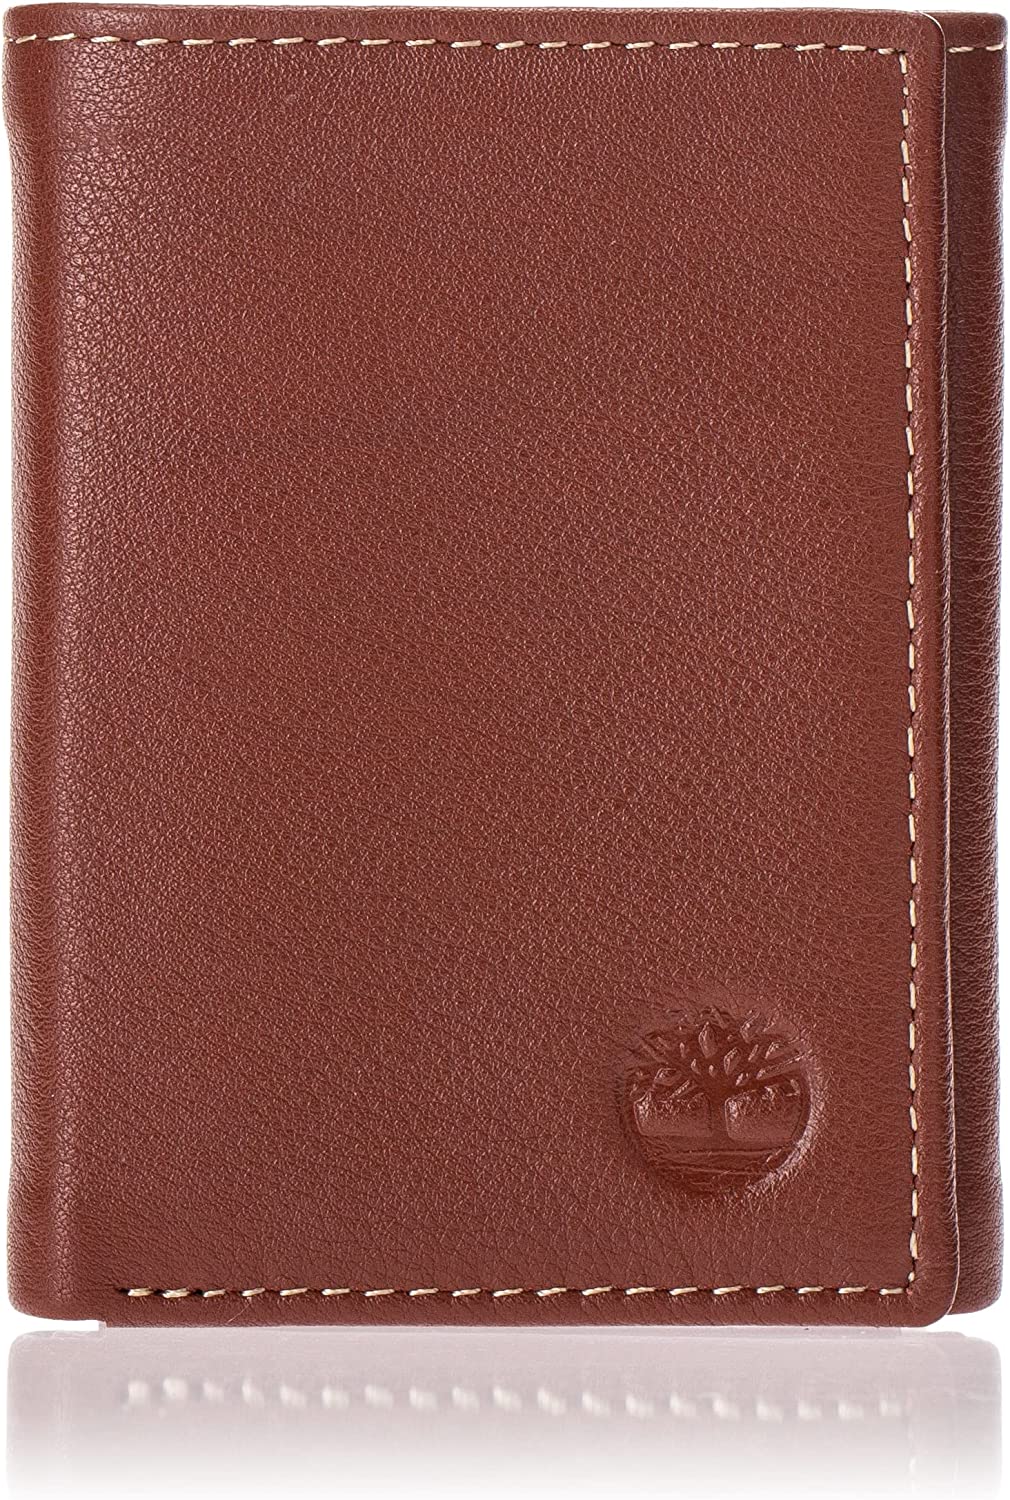 Timberland D01388 Mens Leather Trifold Wallet With ID Window - Brown Cognac - 3alababak